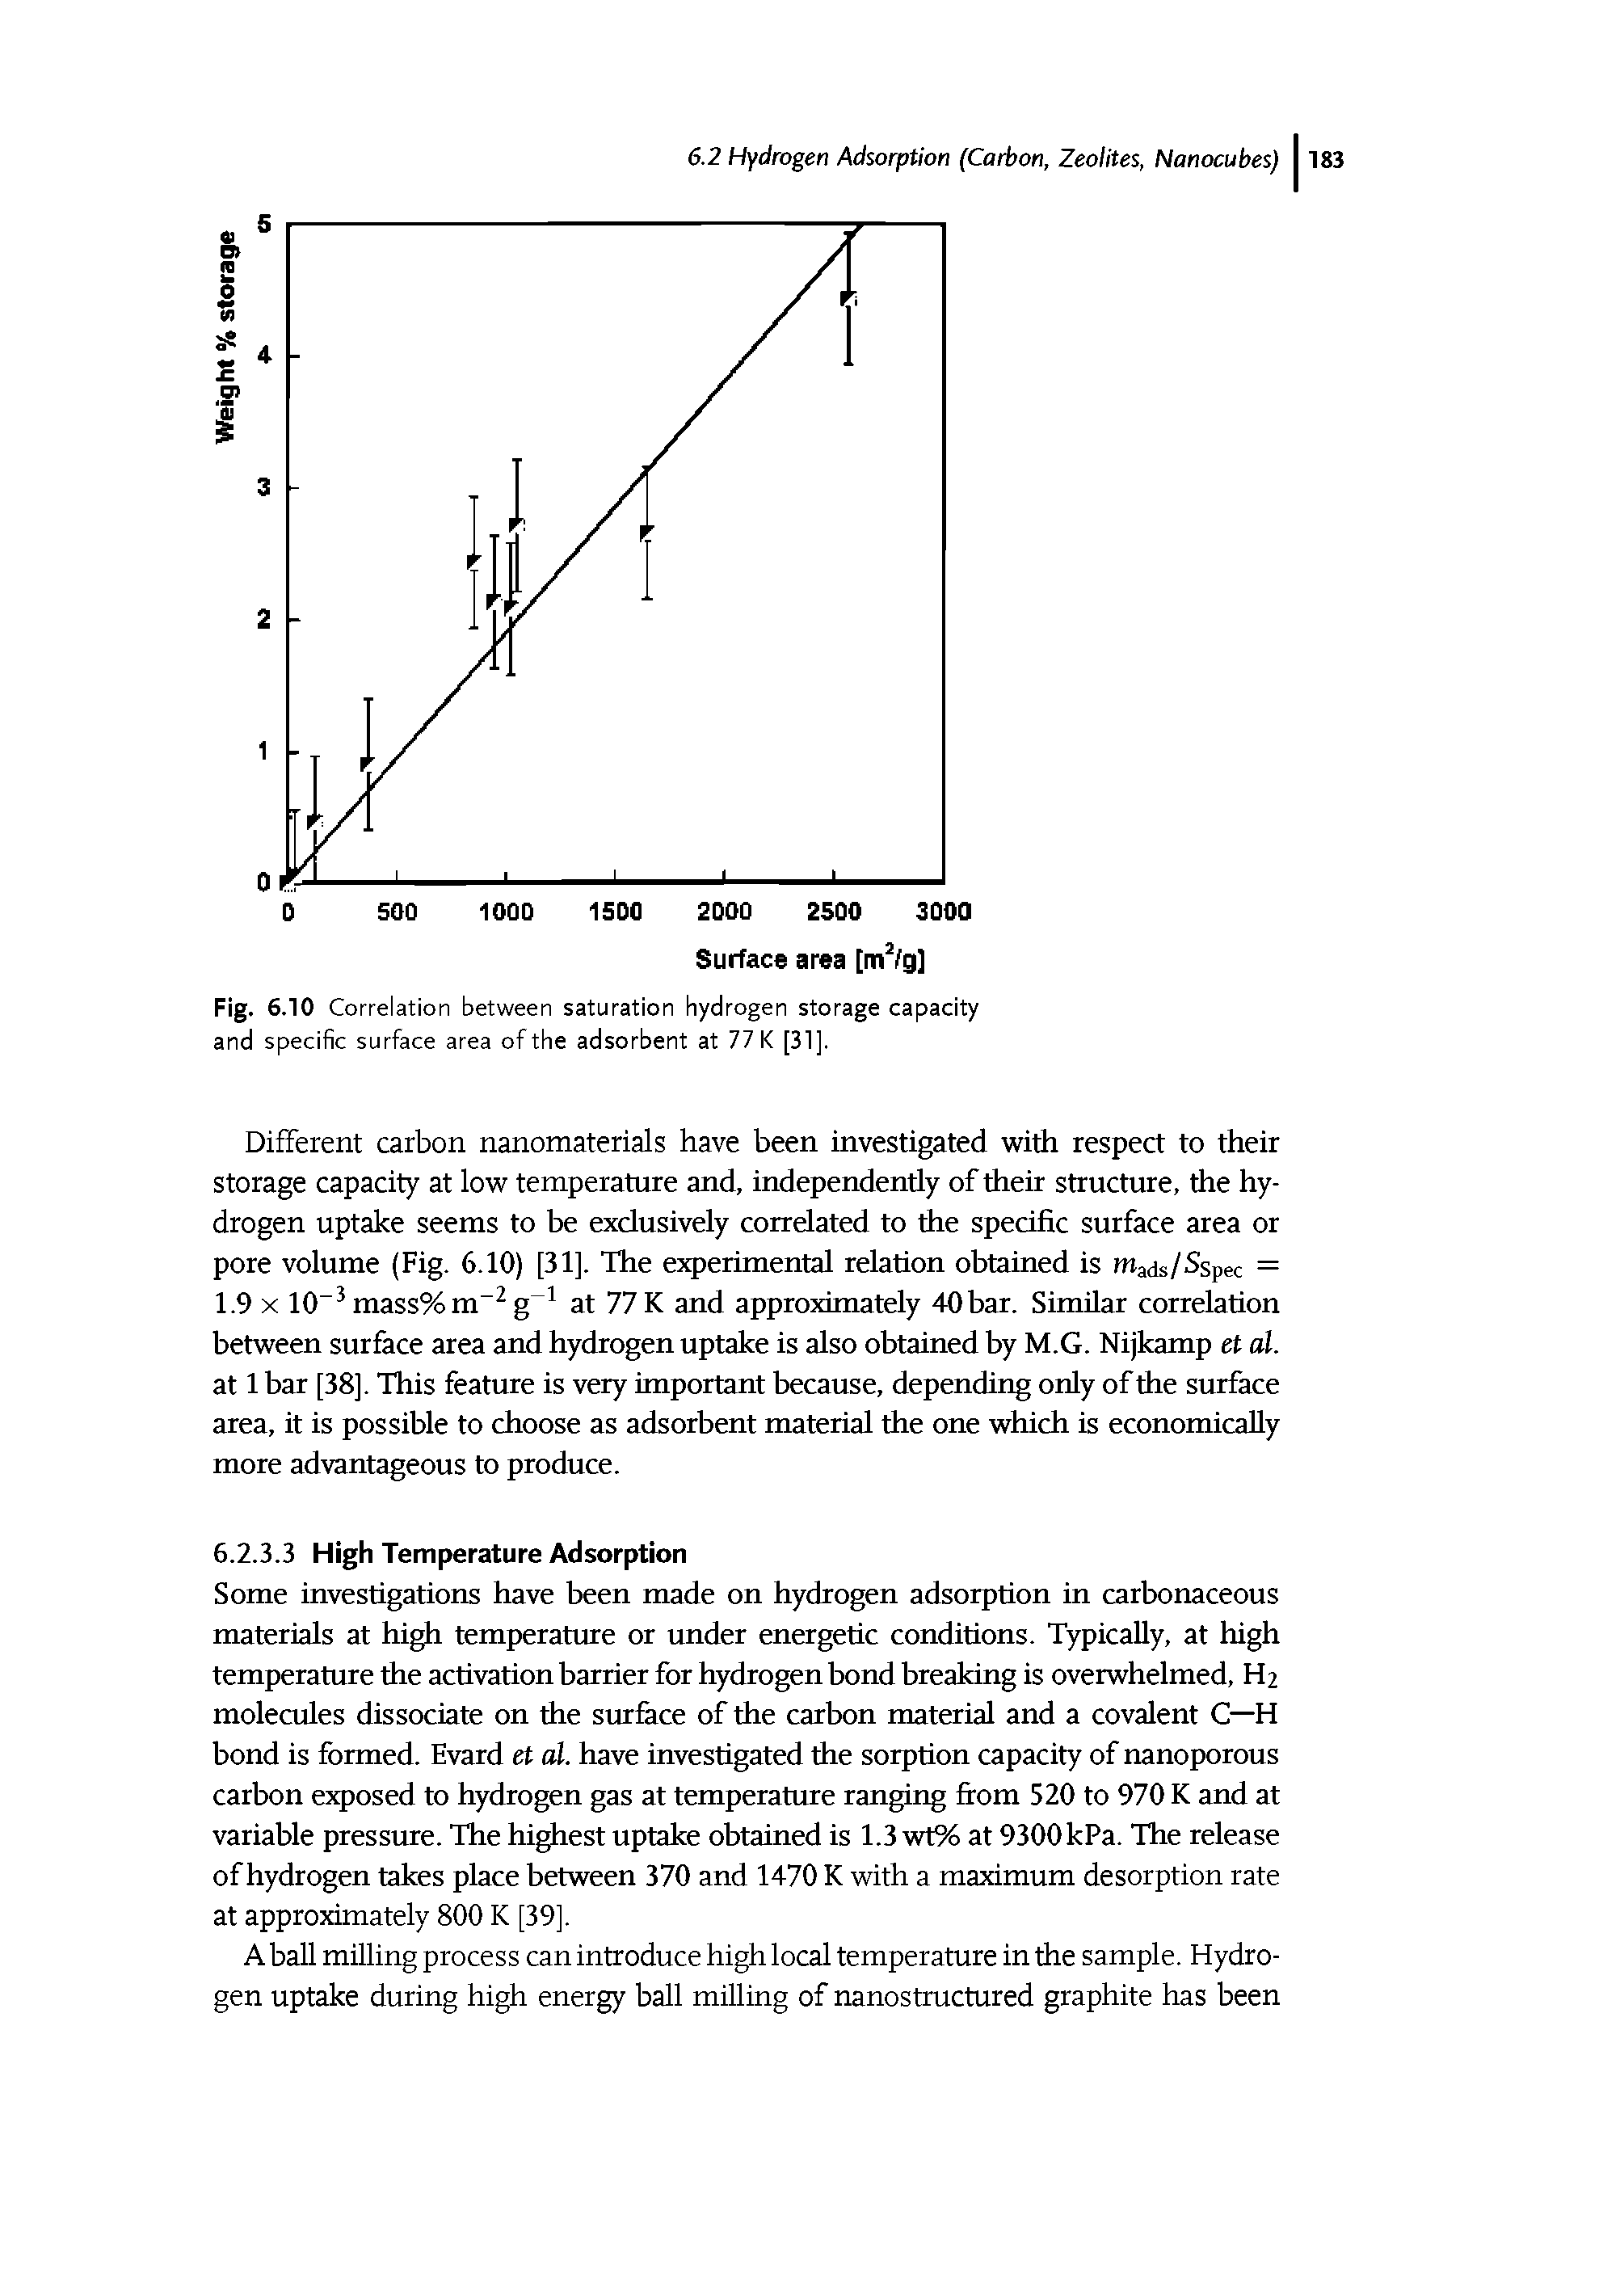 Fig. 6.10 Correlation between saturation hydrogen storage capacity and specific surface area of the adsorbent at 77 K [31].